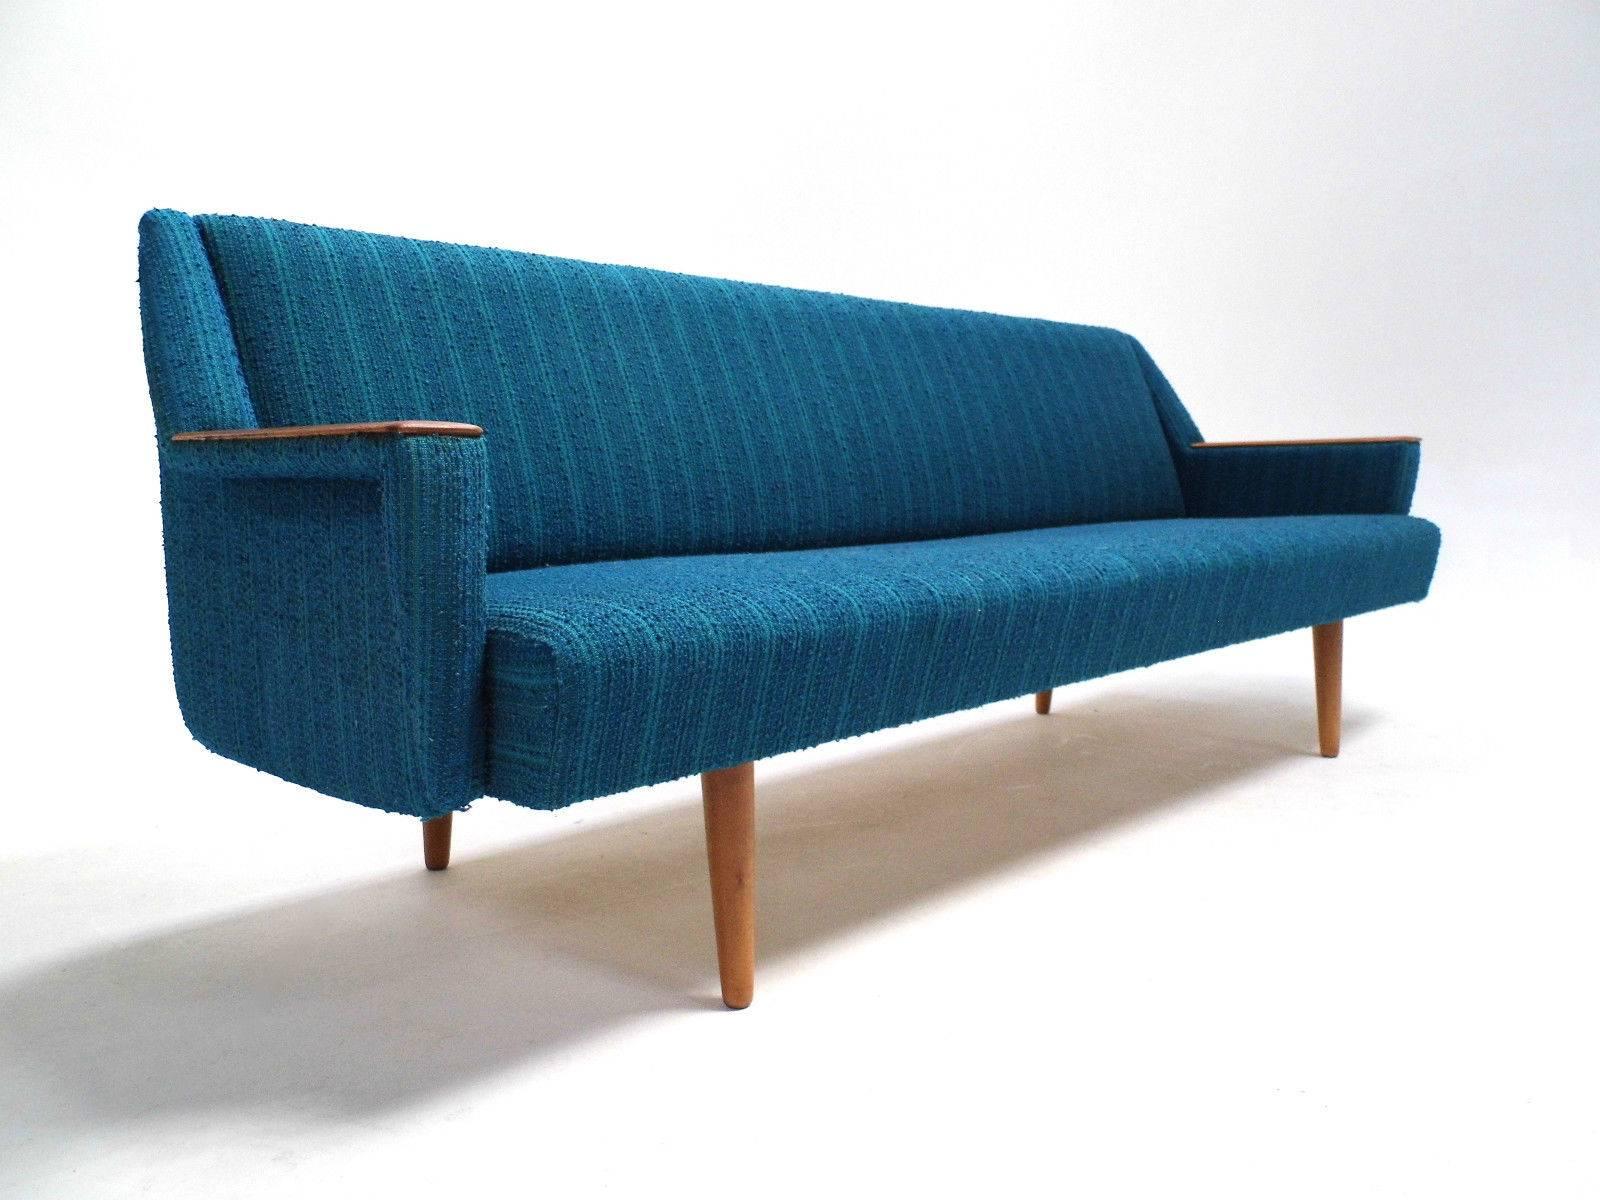 A beautiful Norwegian turquoise blue wool four-seat sofa bed, this would make a stylish addition to any living or bedroom area. The back panel of the sofabed pulls down to create a comfortable double bed. A striking piece of classically designed